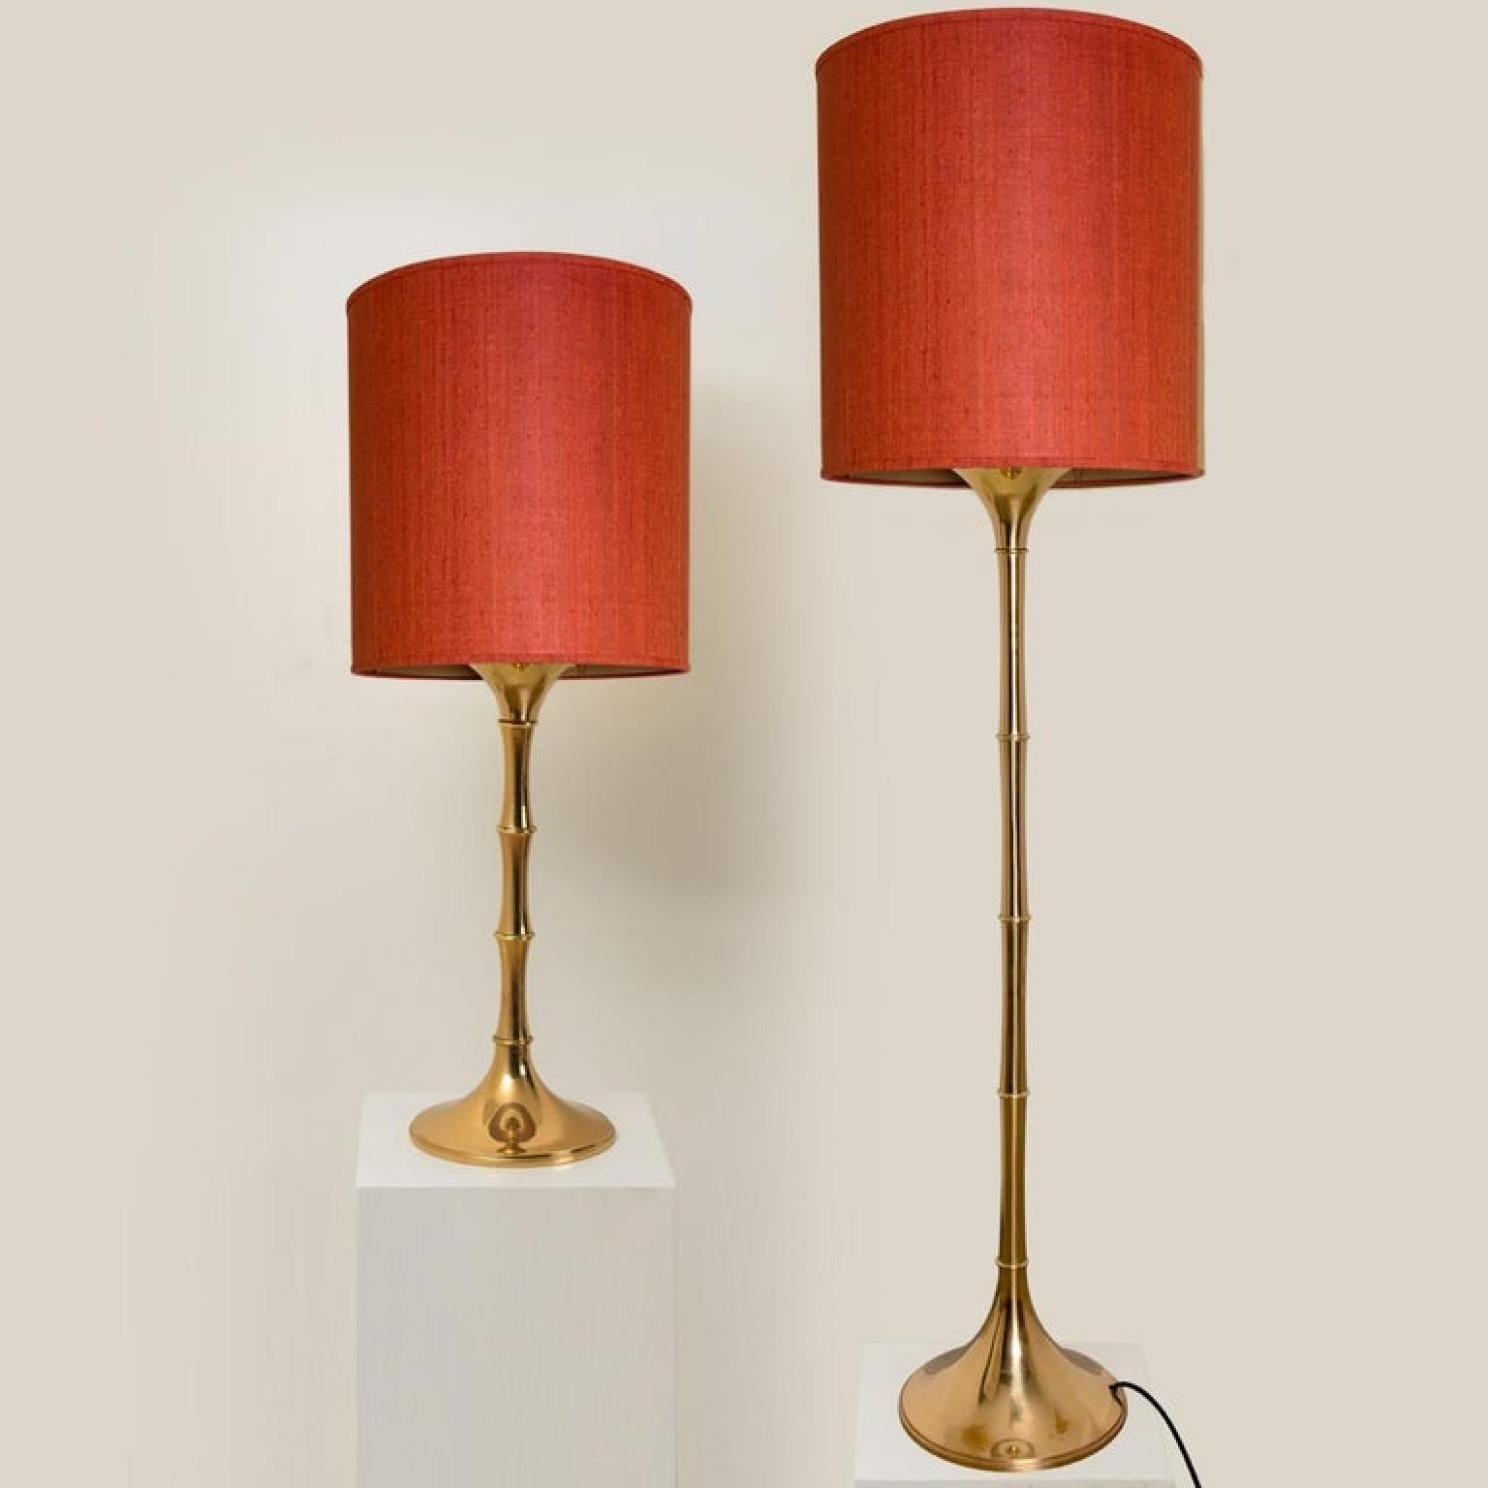 Pair of Table and Floor Lamp Designed by Ingo Maurer, 1968 For Sale 1